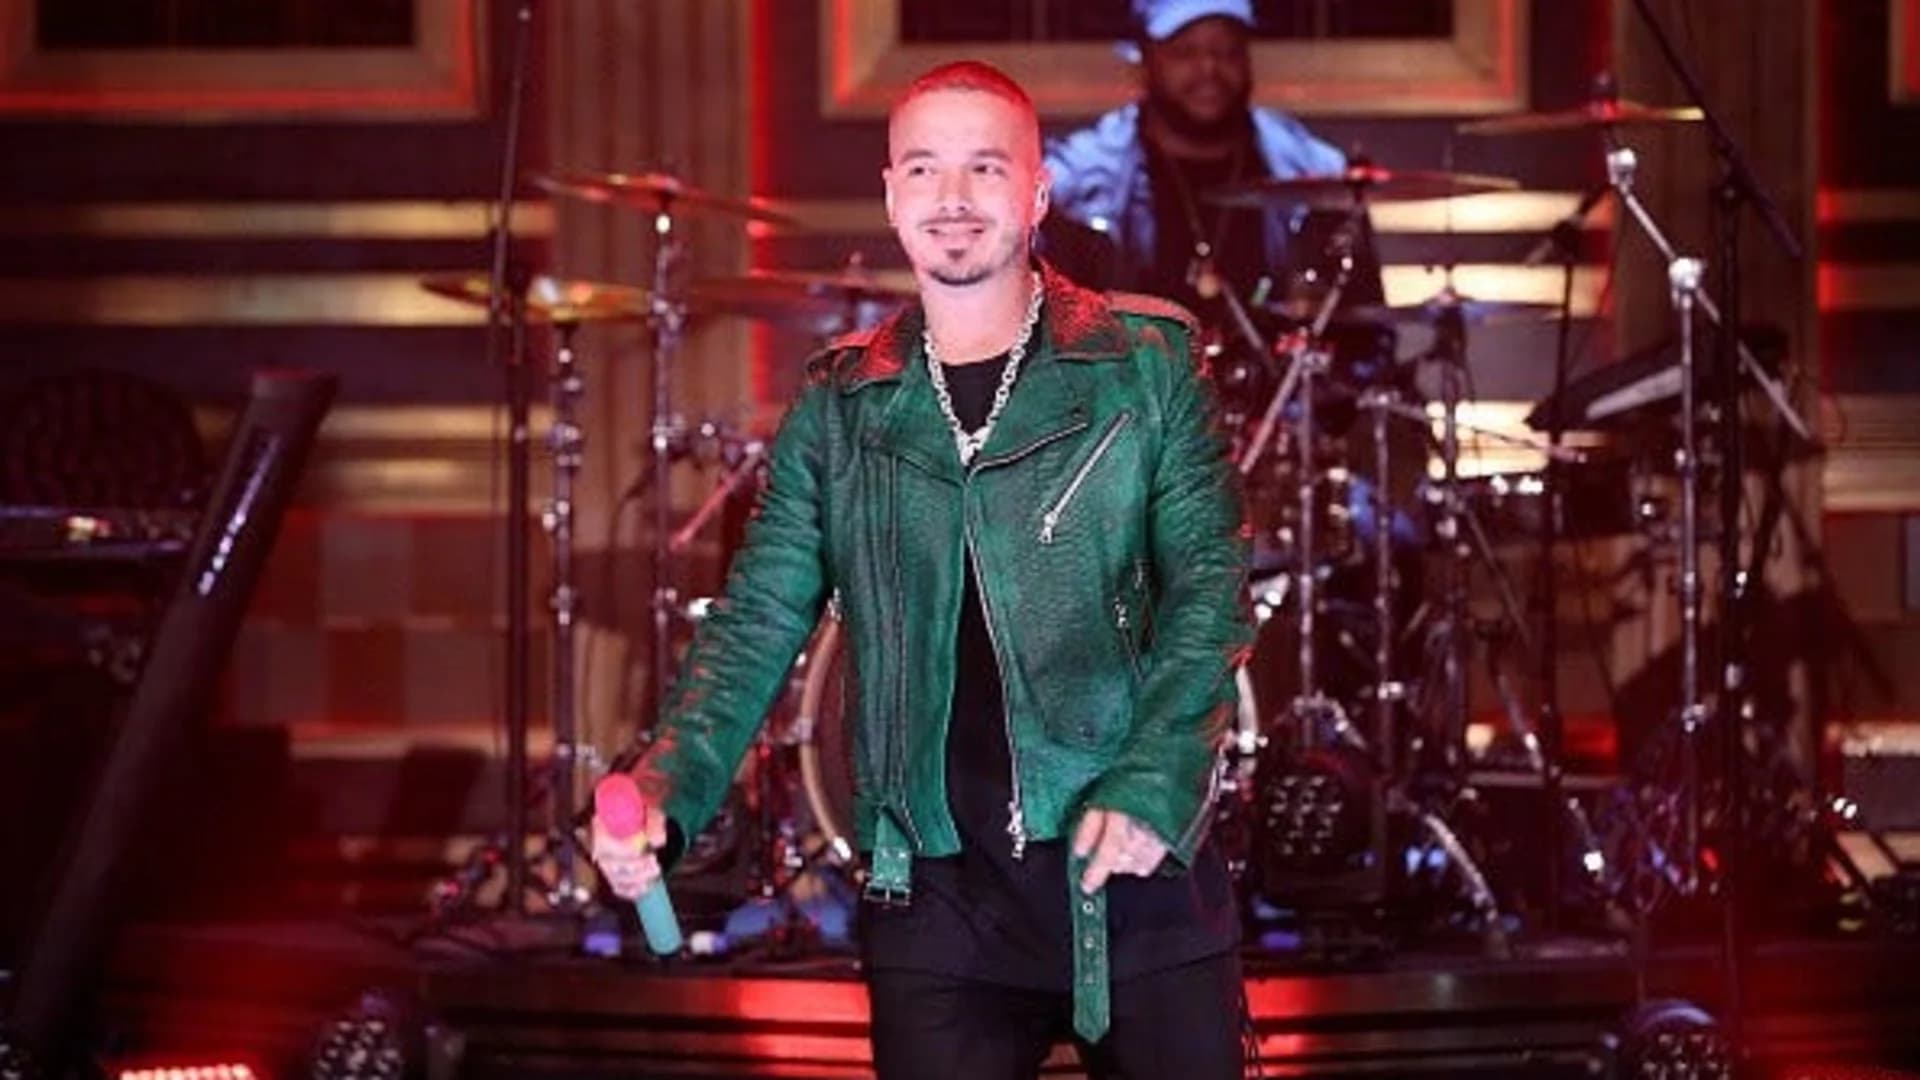 J Balvin leads Latin Grammy noms with 8 nods, 1 with Beyonce